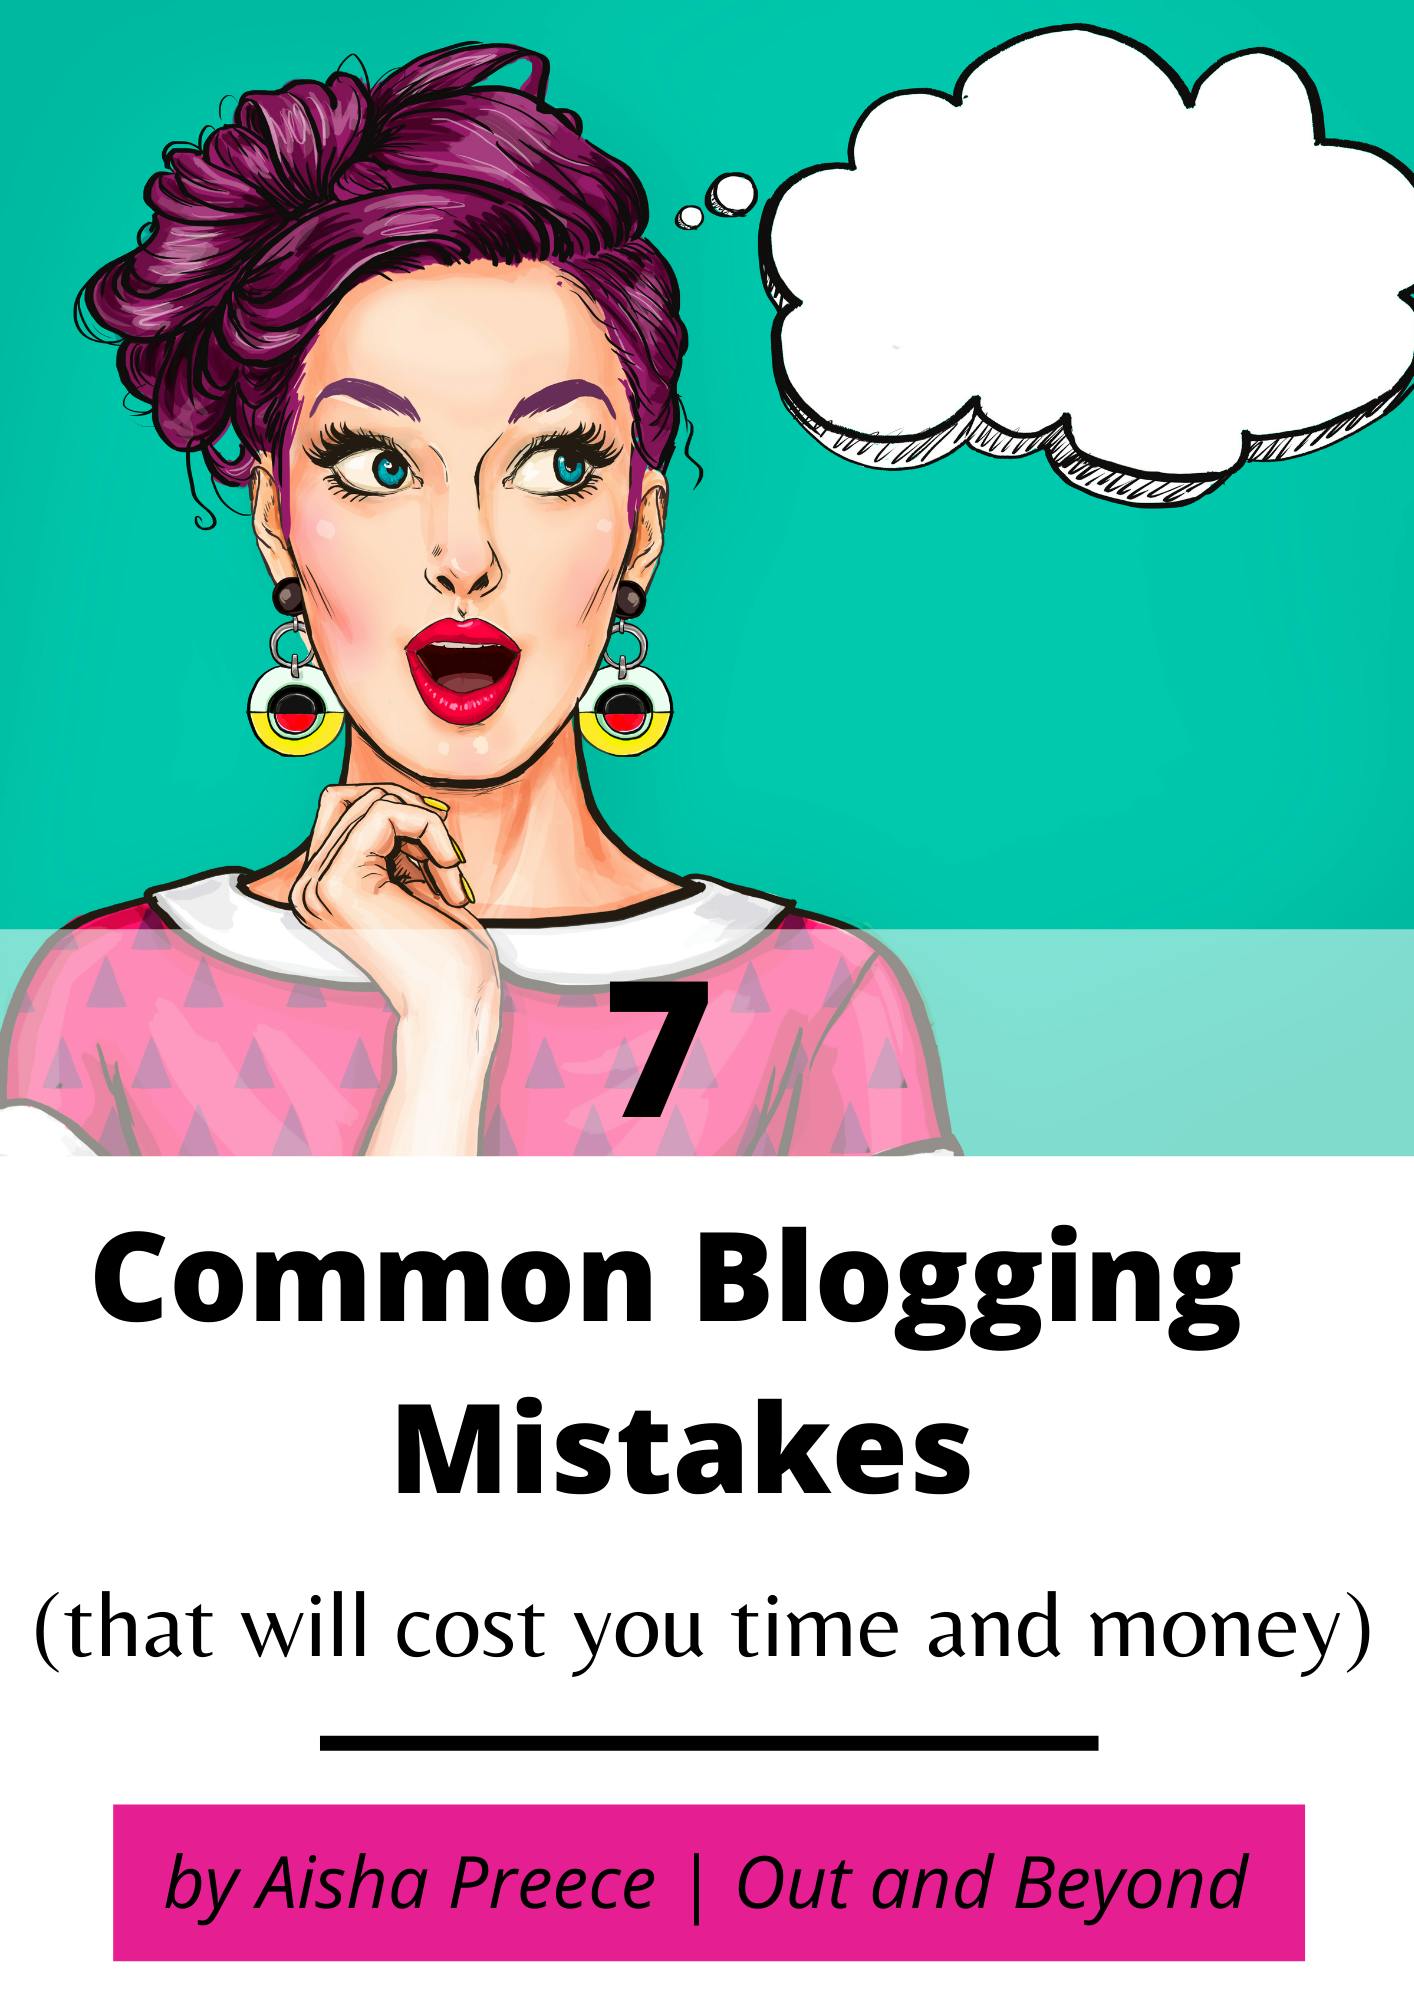 7-common-blogging-mistakes-that-will-cost-you-time-and-money